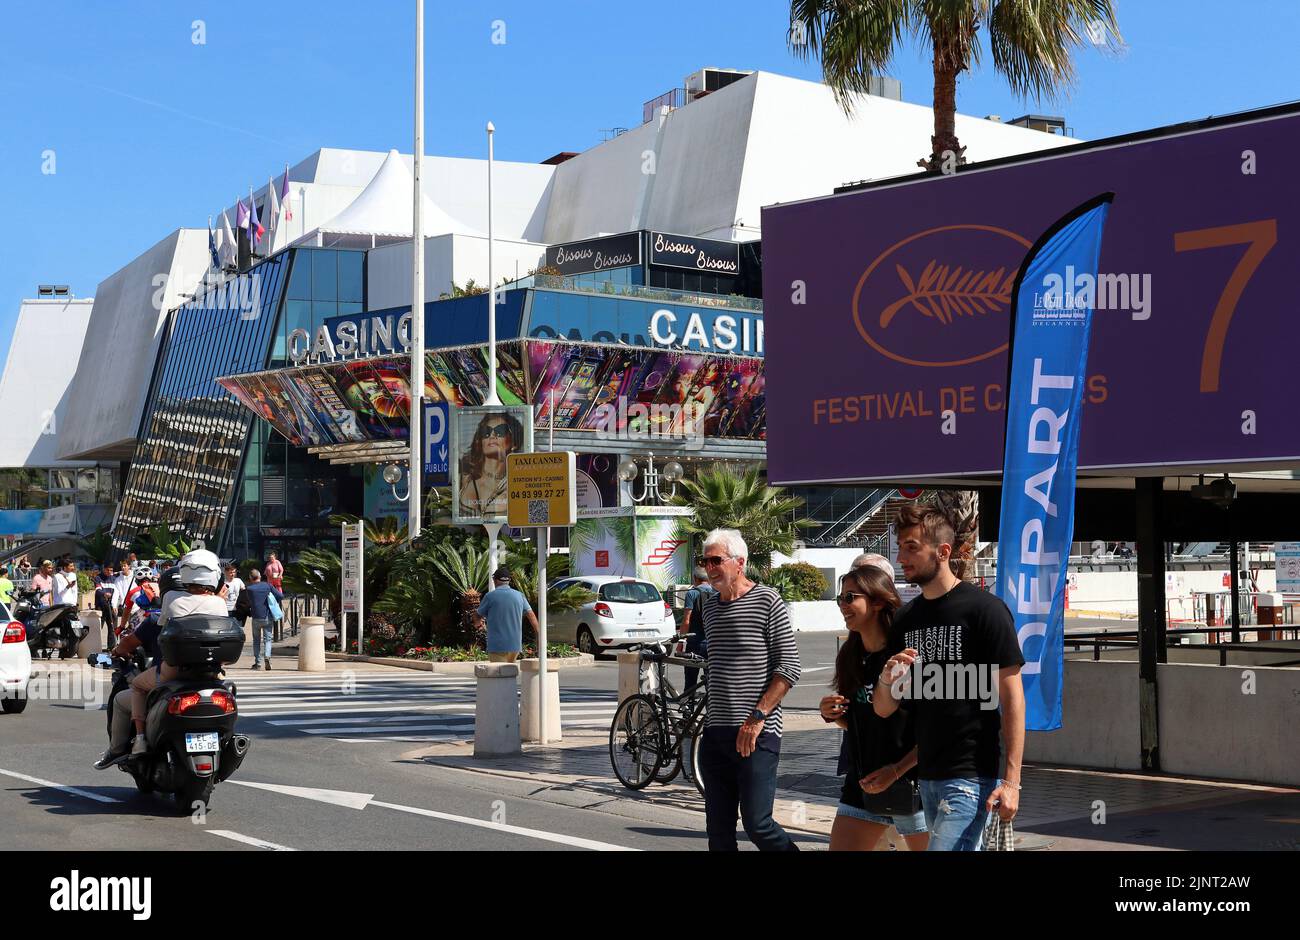 A busy street scene on the Boulevard de la Croisette, Cannes, France, a week before the 75th Film Festival, May 2022 Stock Photo